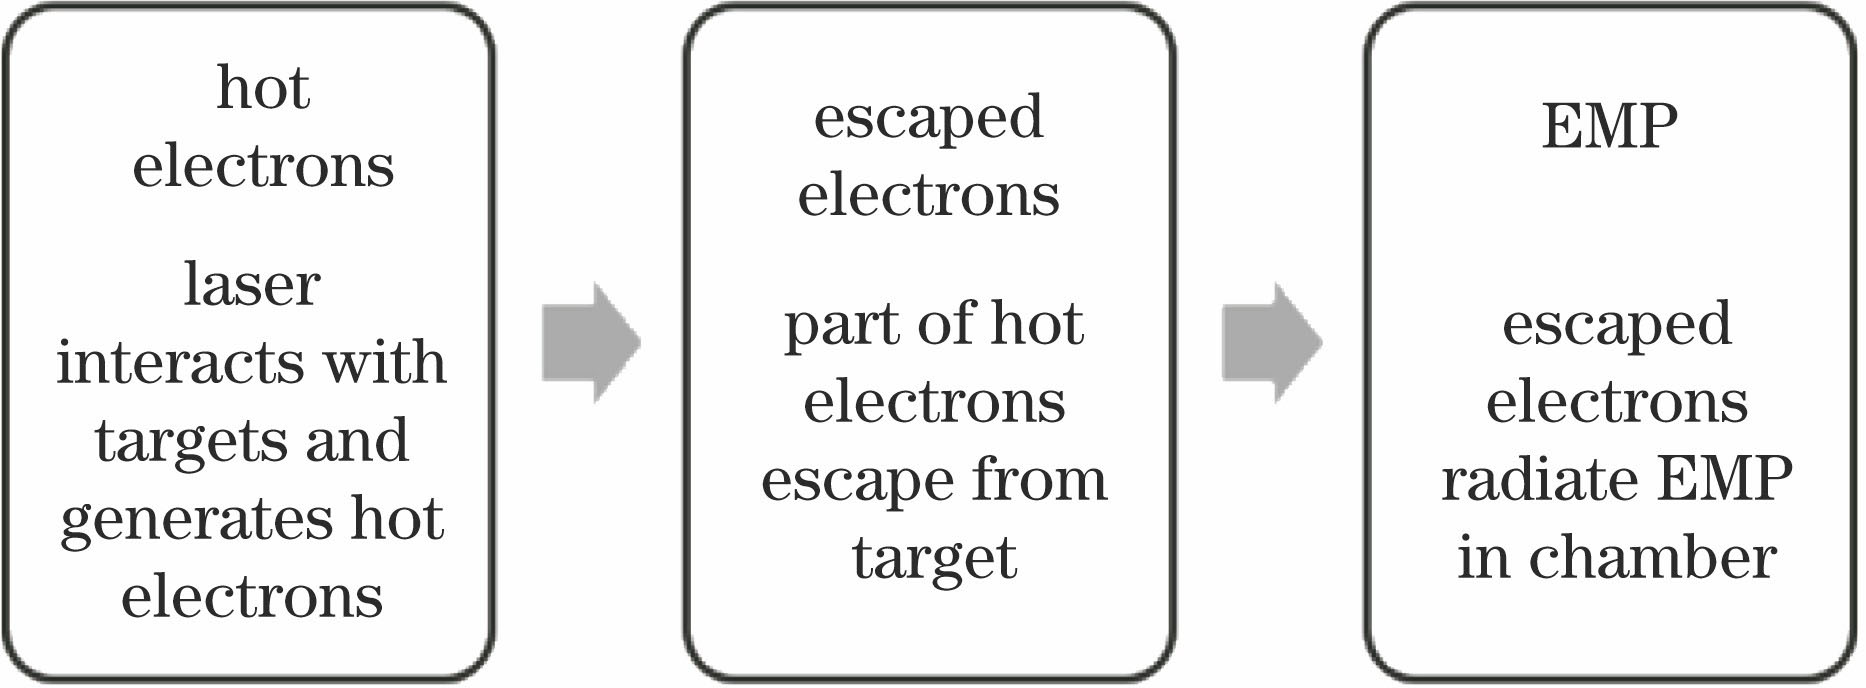 Simulation process of escaped hot electrons radiating EMP